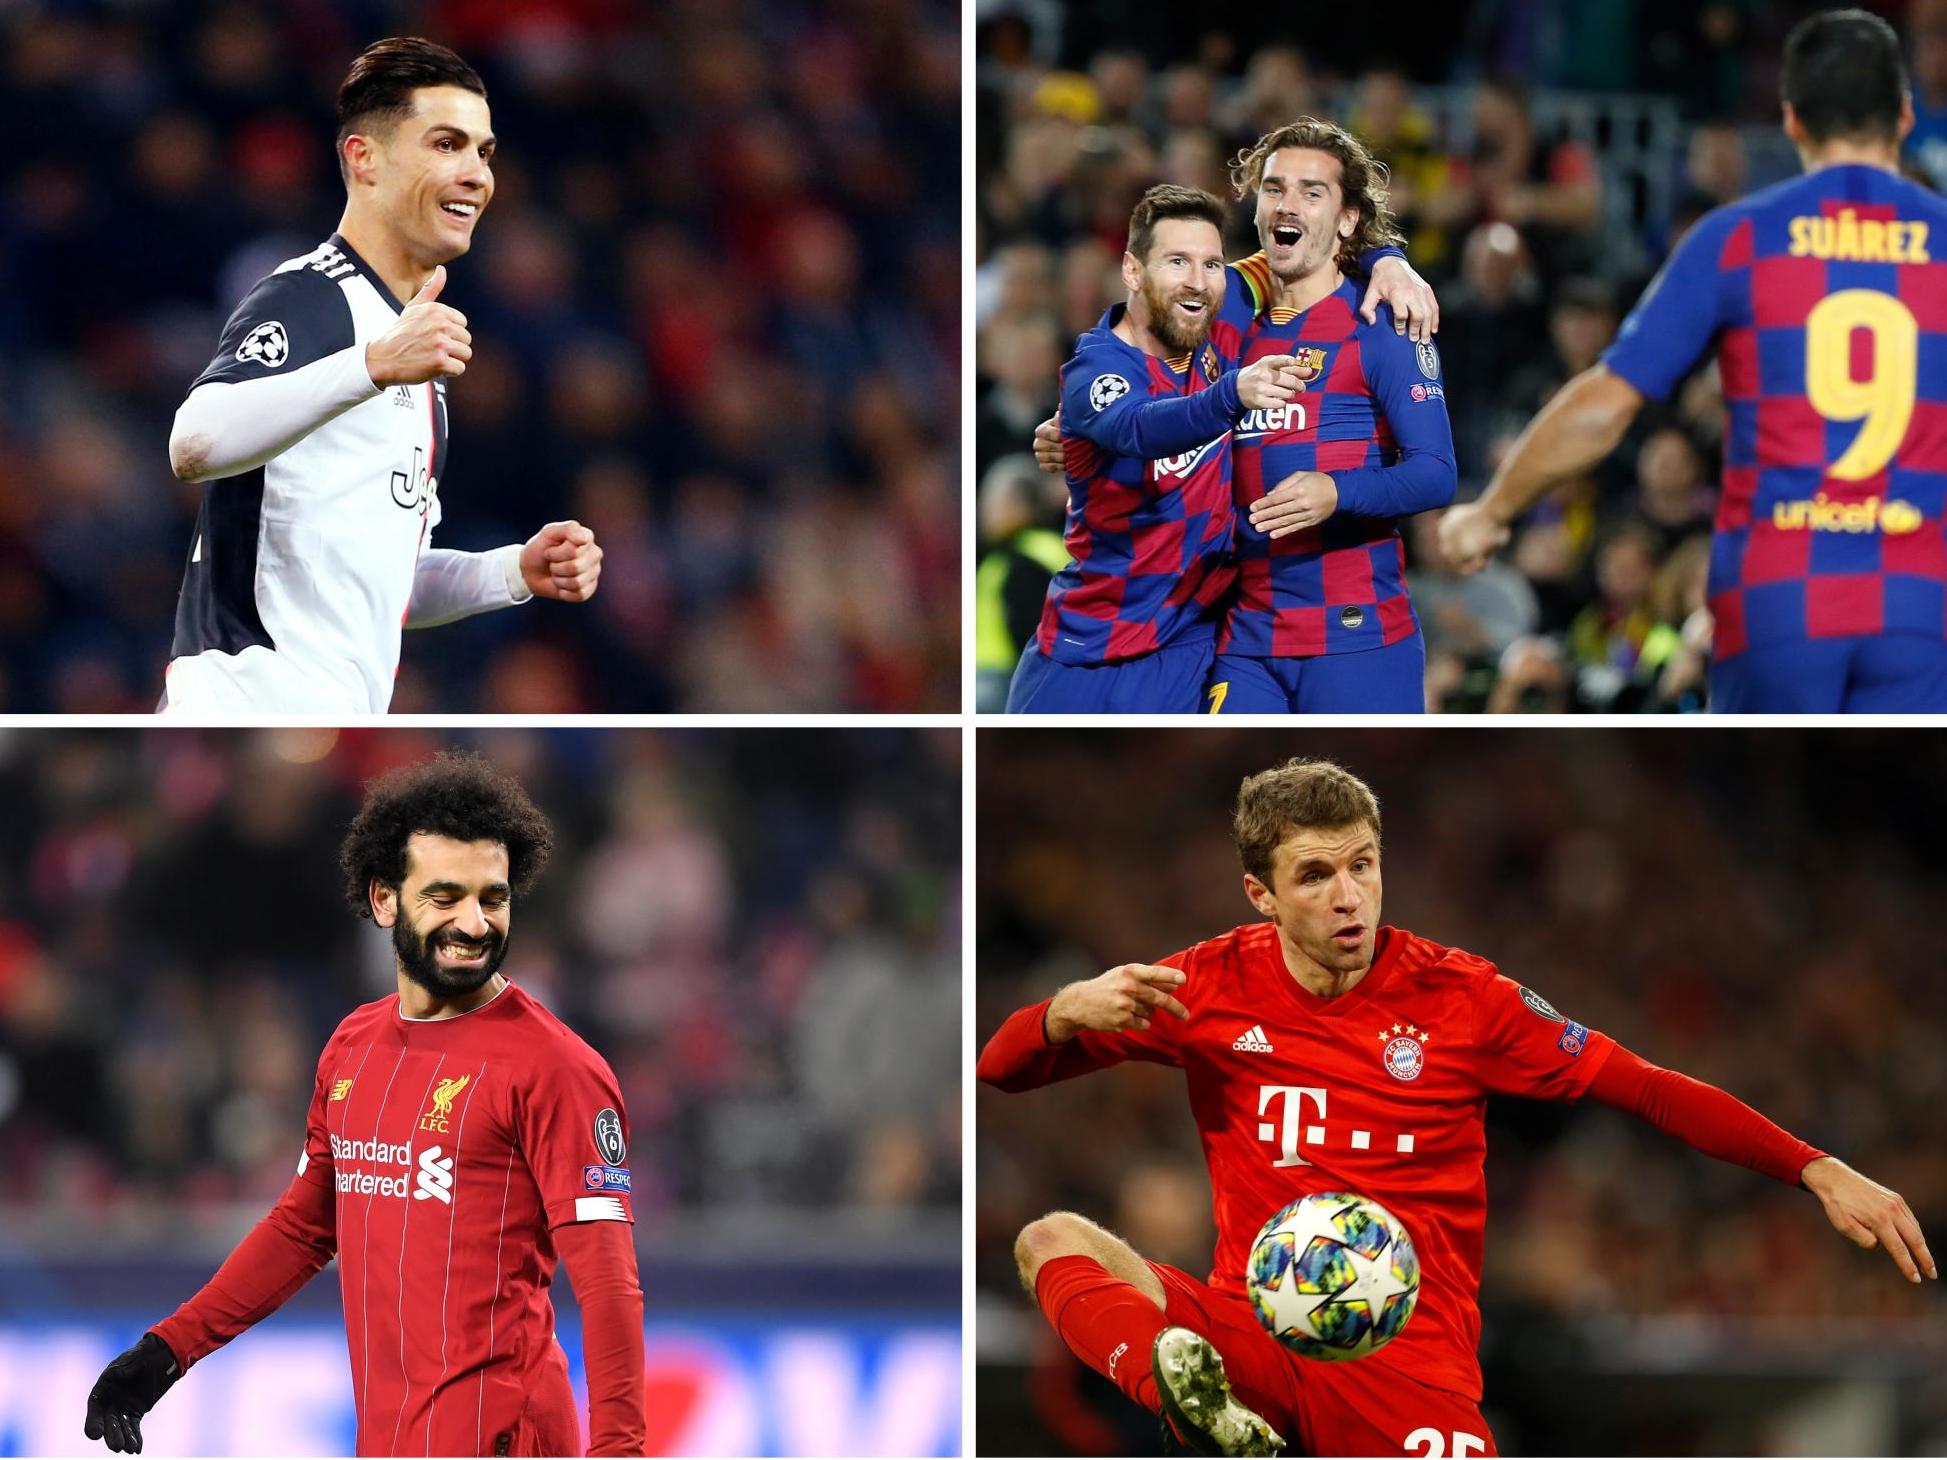 All the big hitters will be in the Champions League last-16 draw